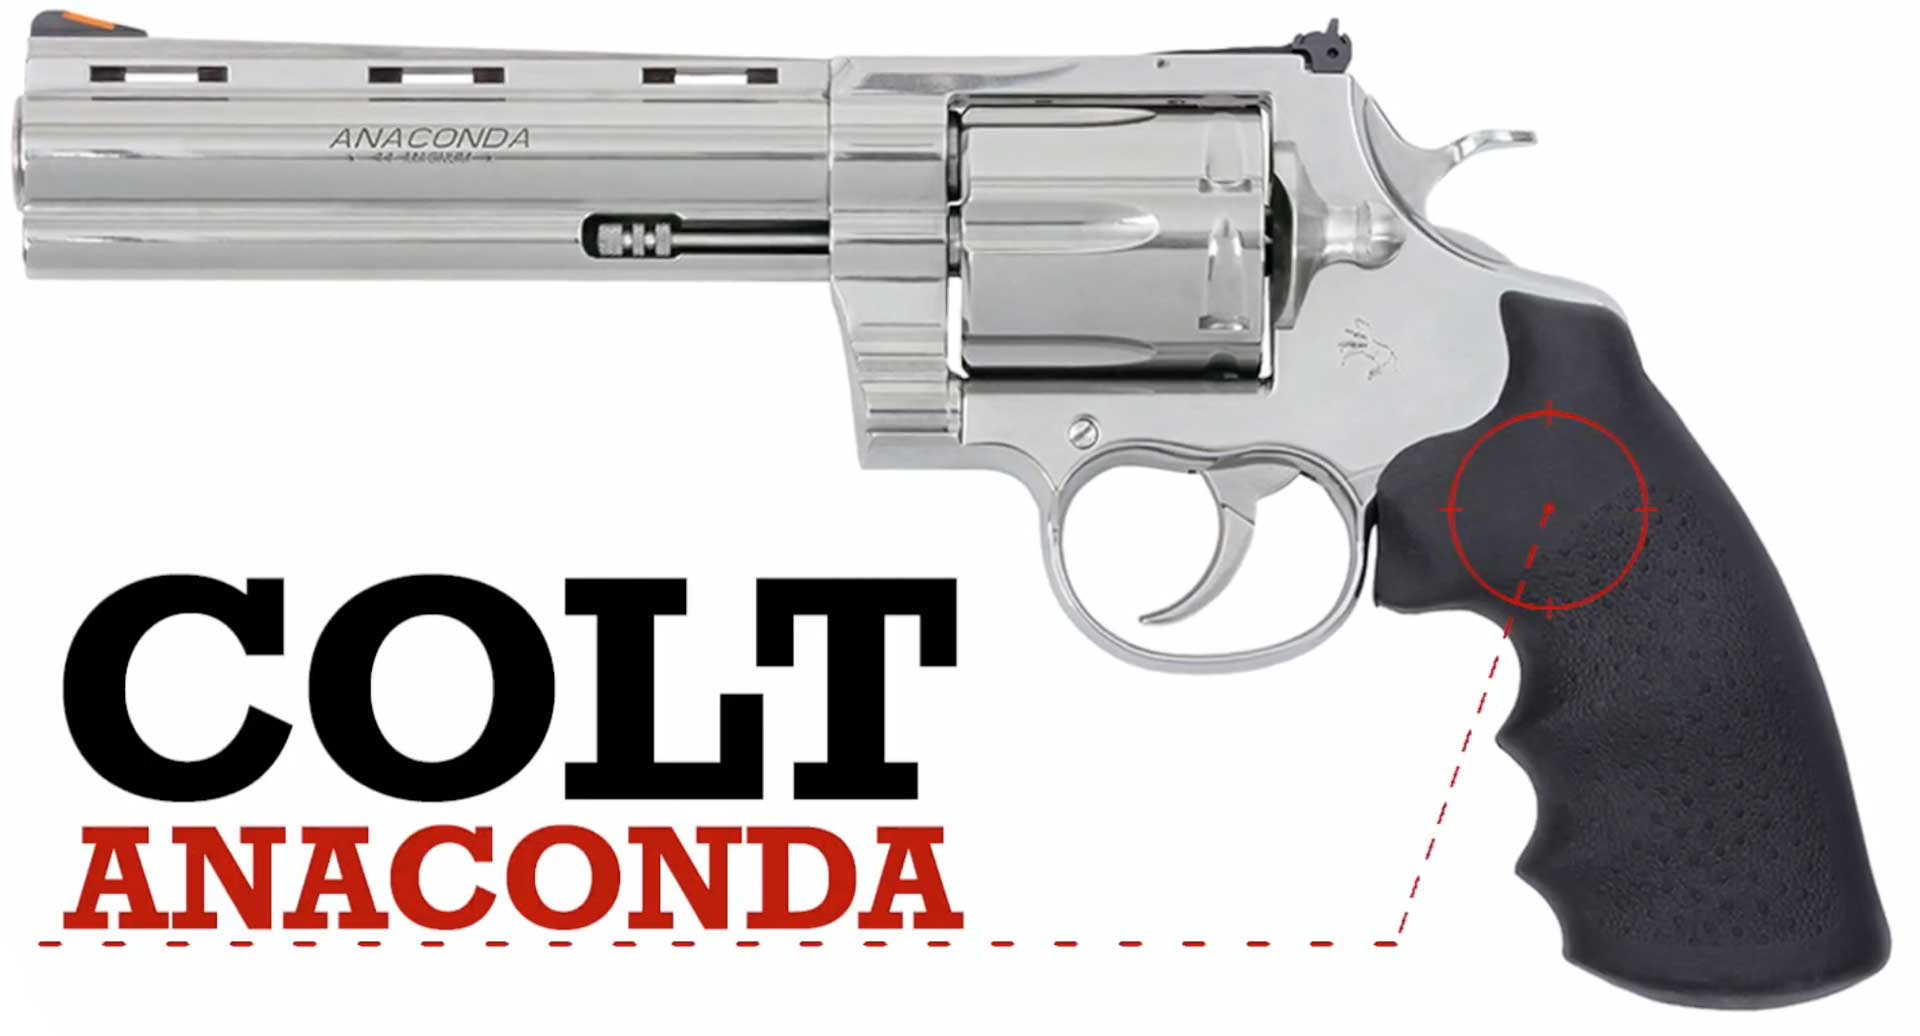 gun revolver silver stainless steel black grips text on image noting make and model Colt Anaconda